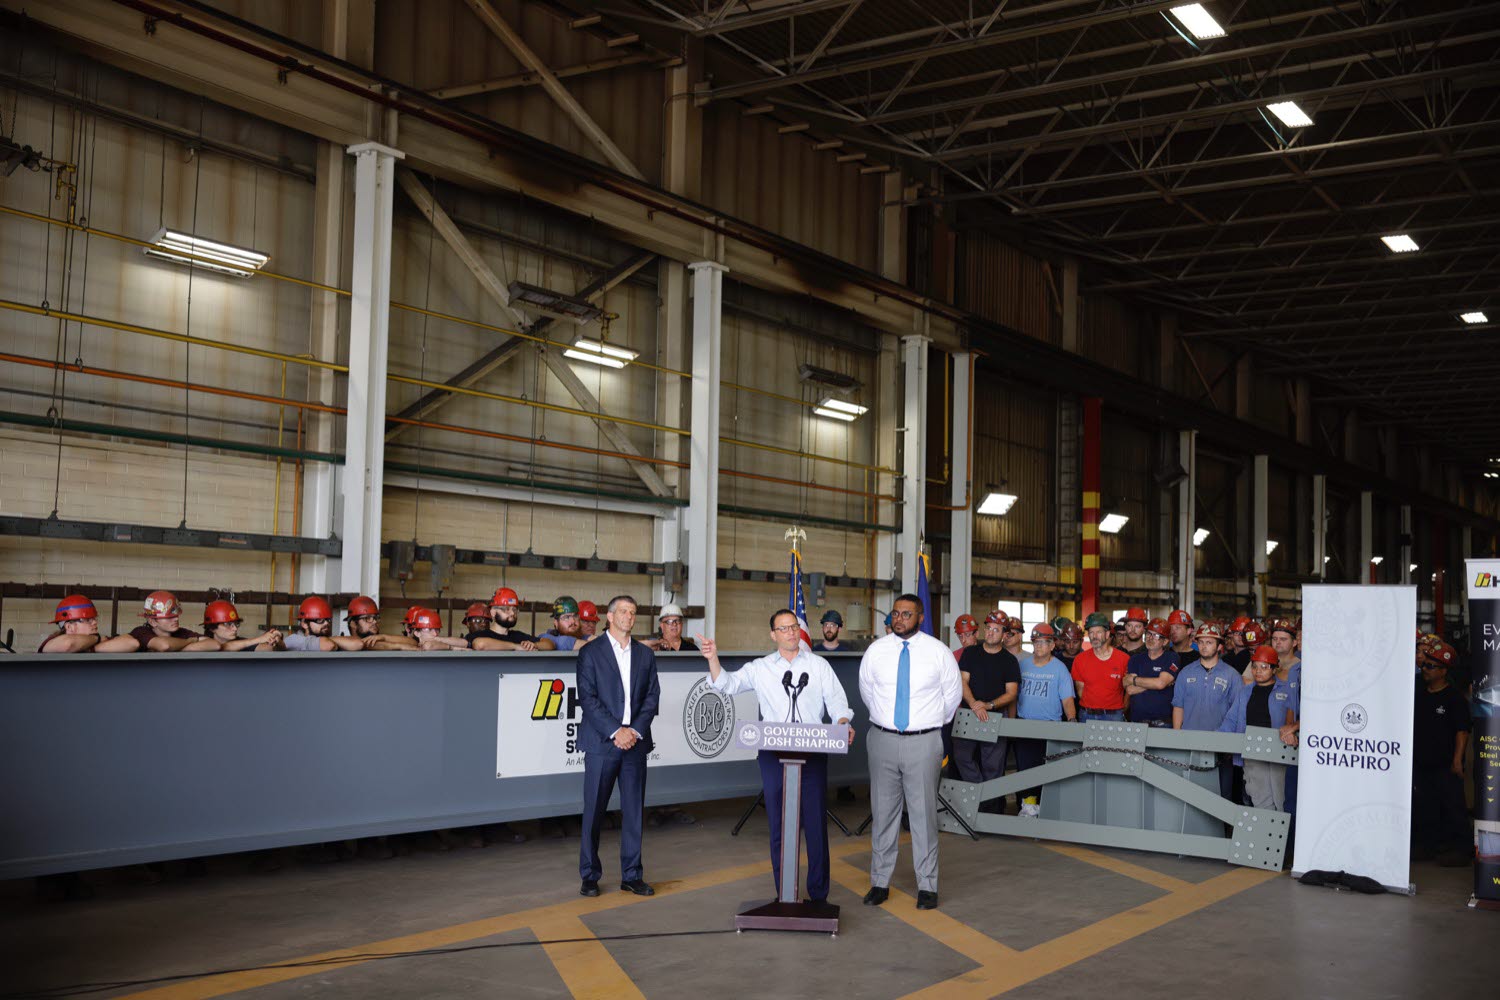 Governor Shapiro Visits High Steel Structures in Lancaster, PA